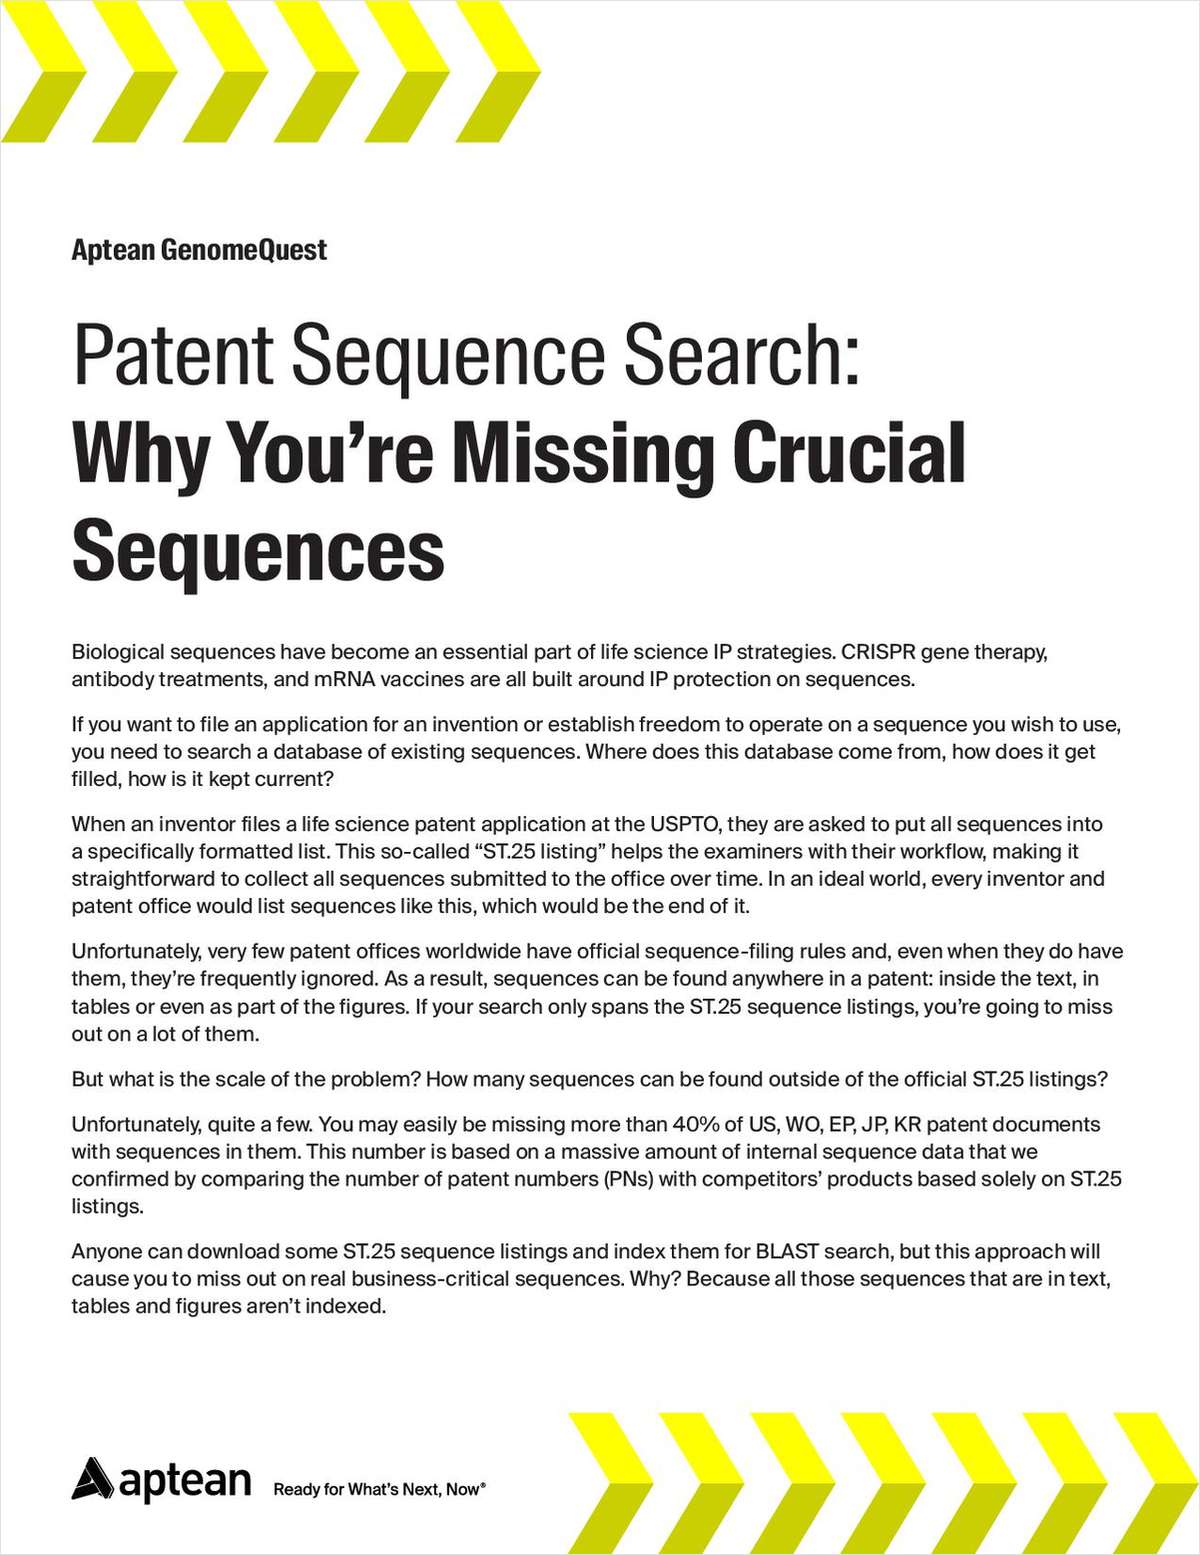 Patent Sequence Search: Why You're Missing Crucial Sequences